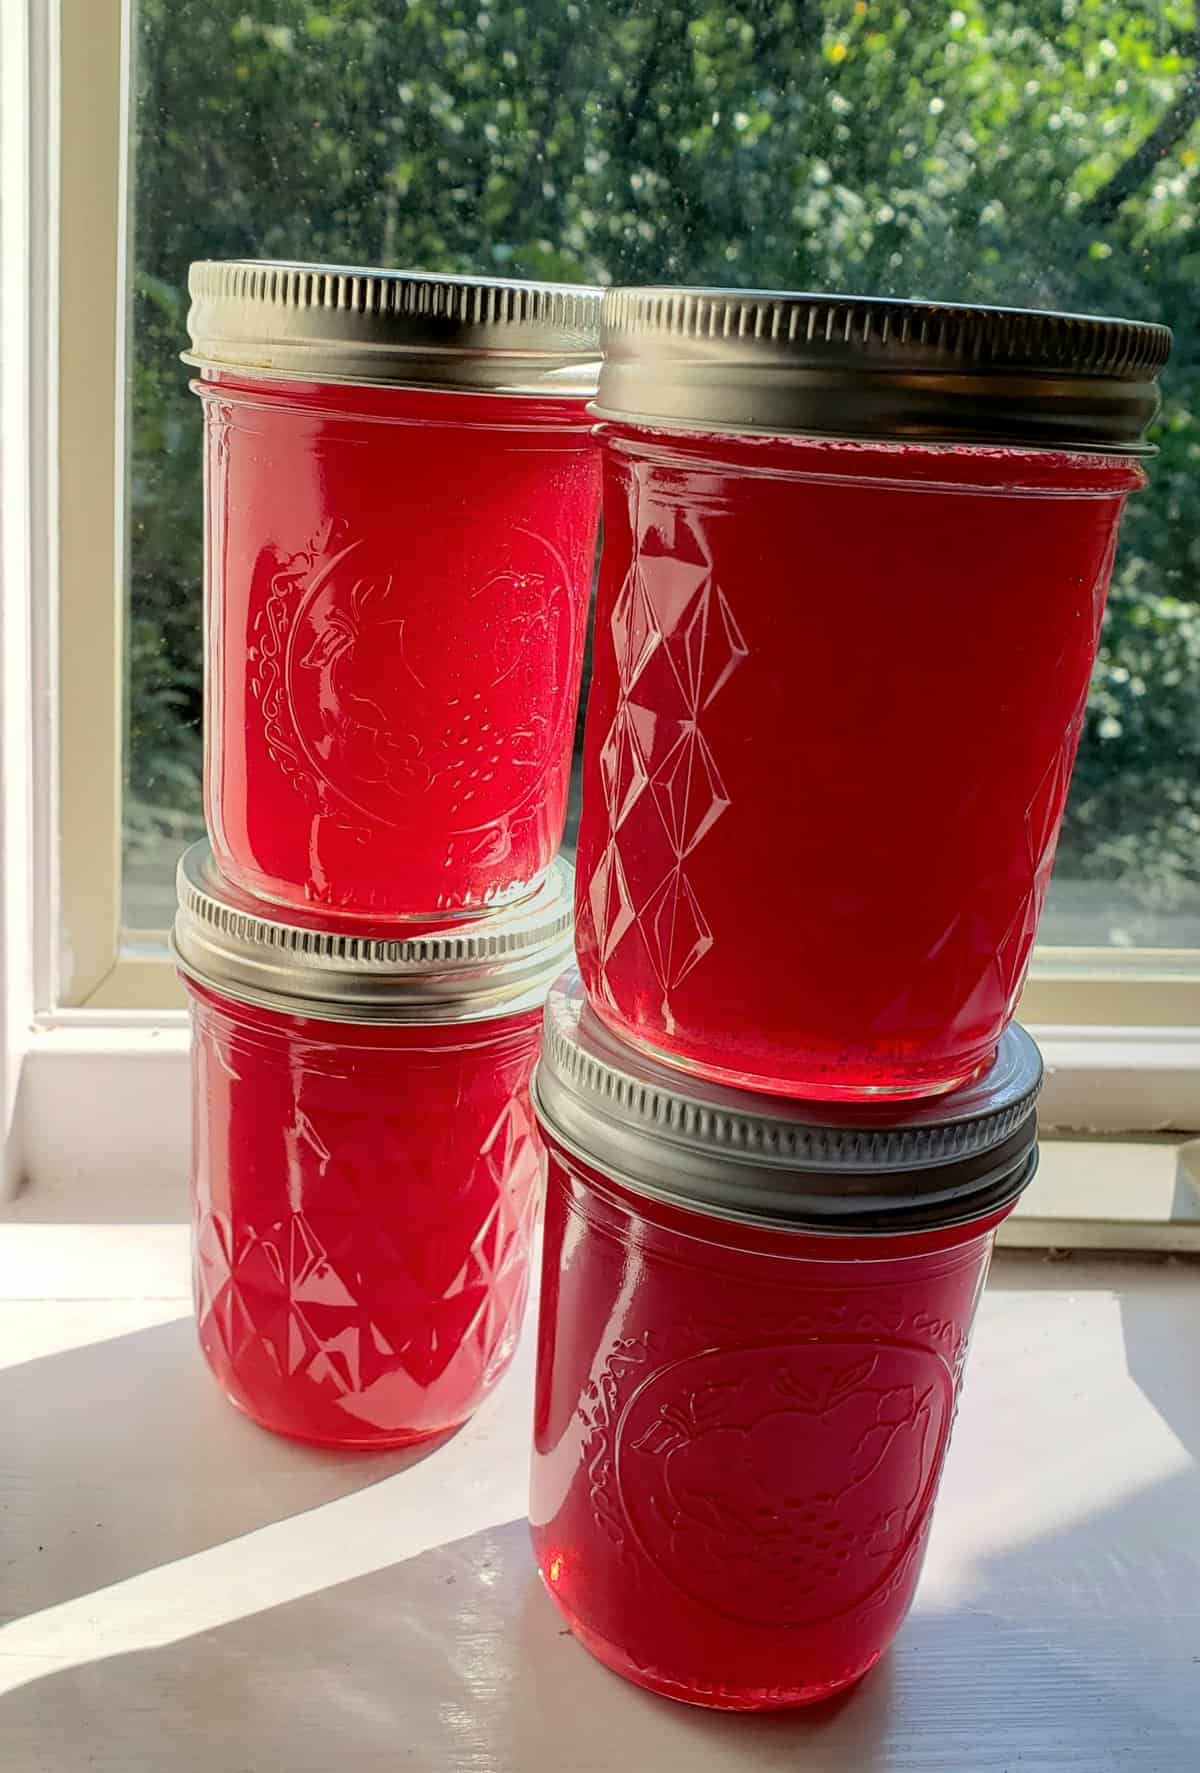 4 jars of muscadine jelly stacked in a window